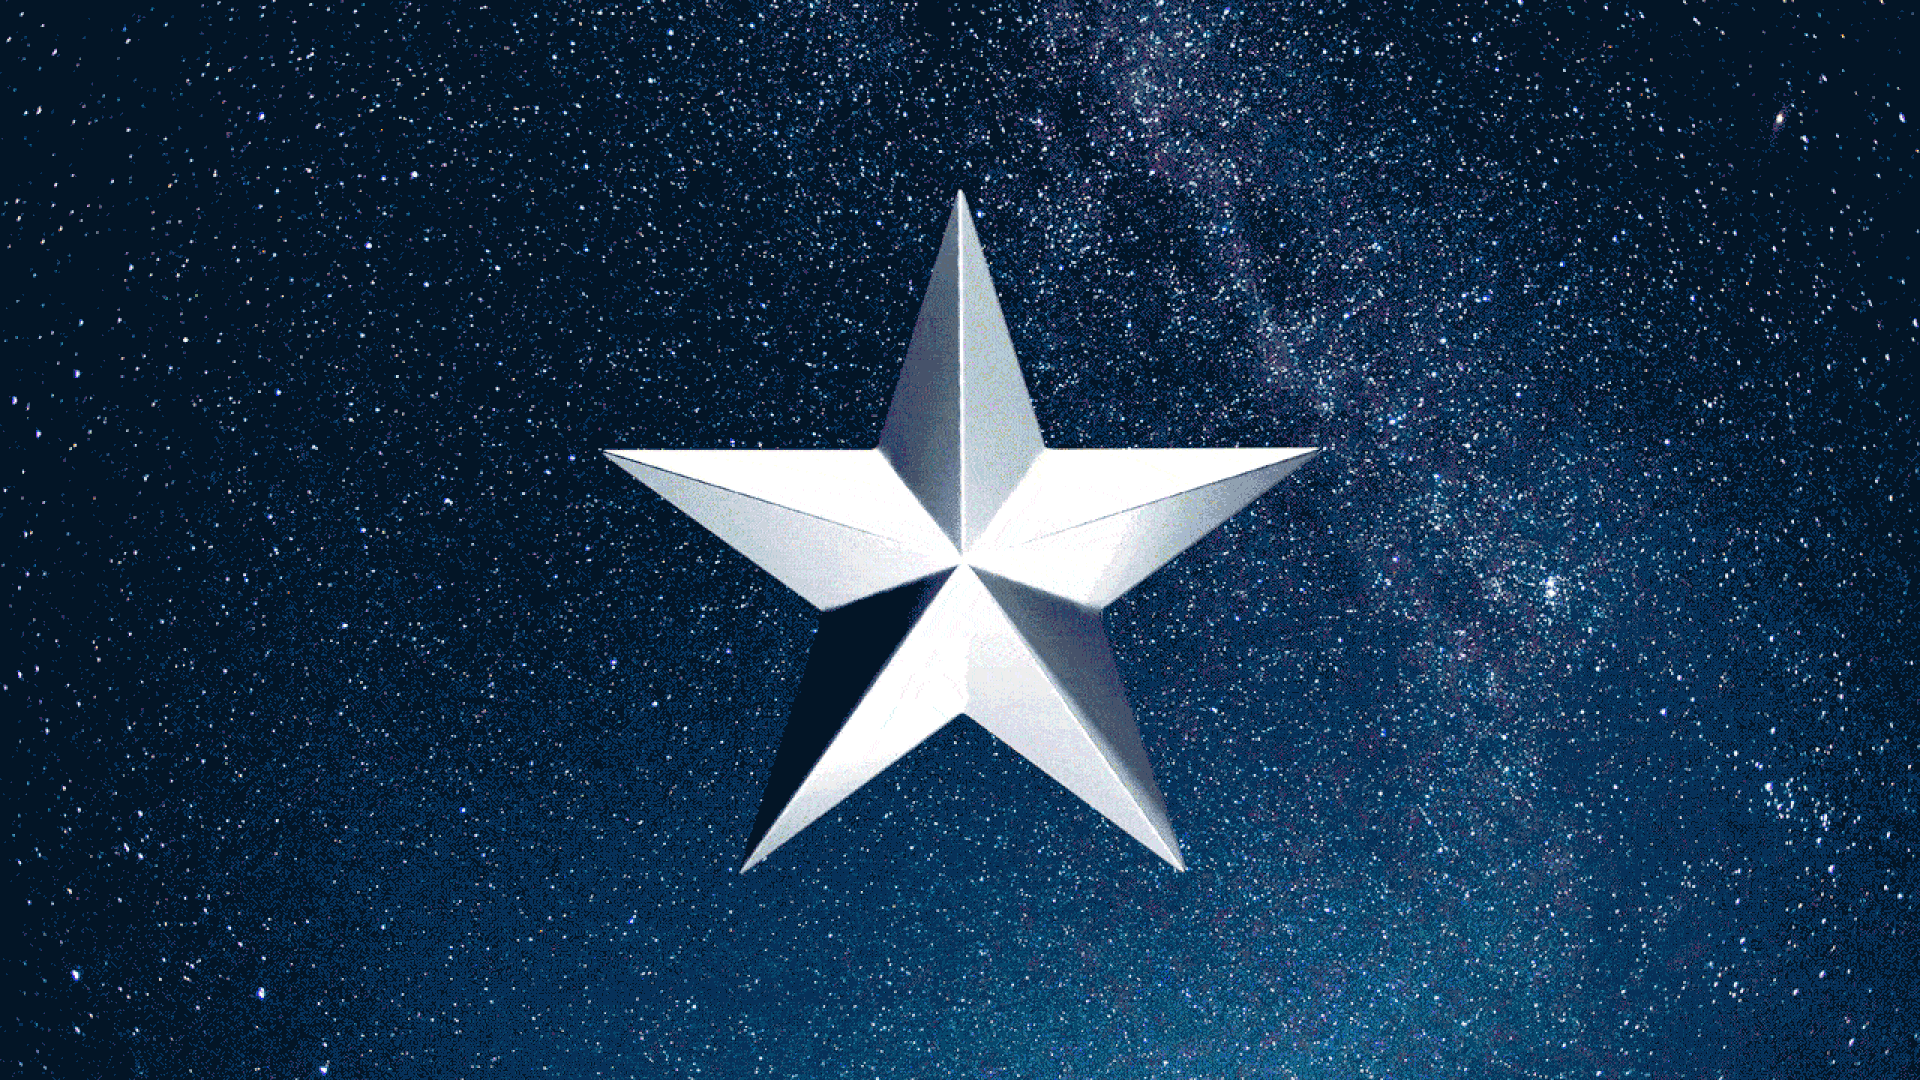 Animated illustration of a white star and a yellow star separating against a space background.